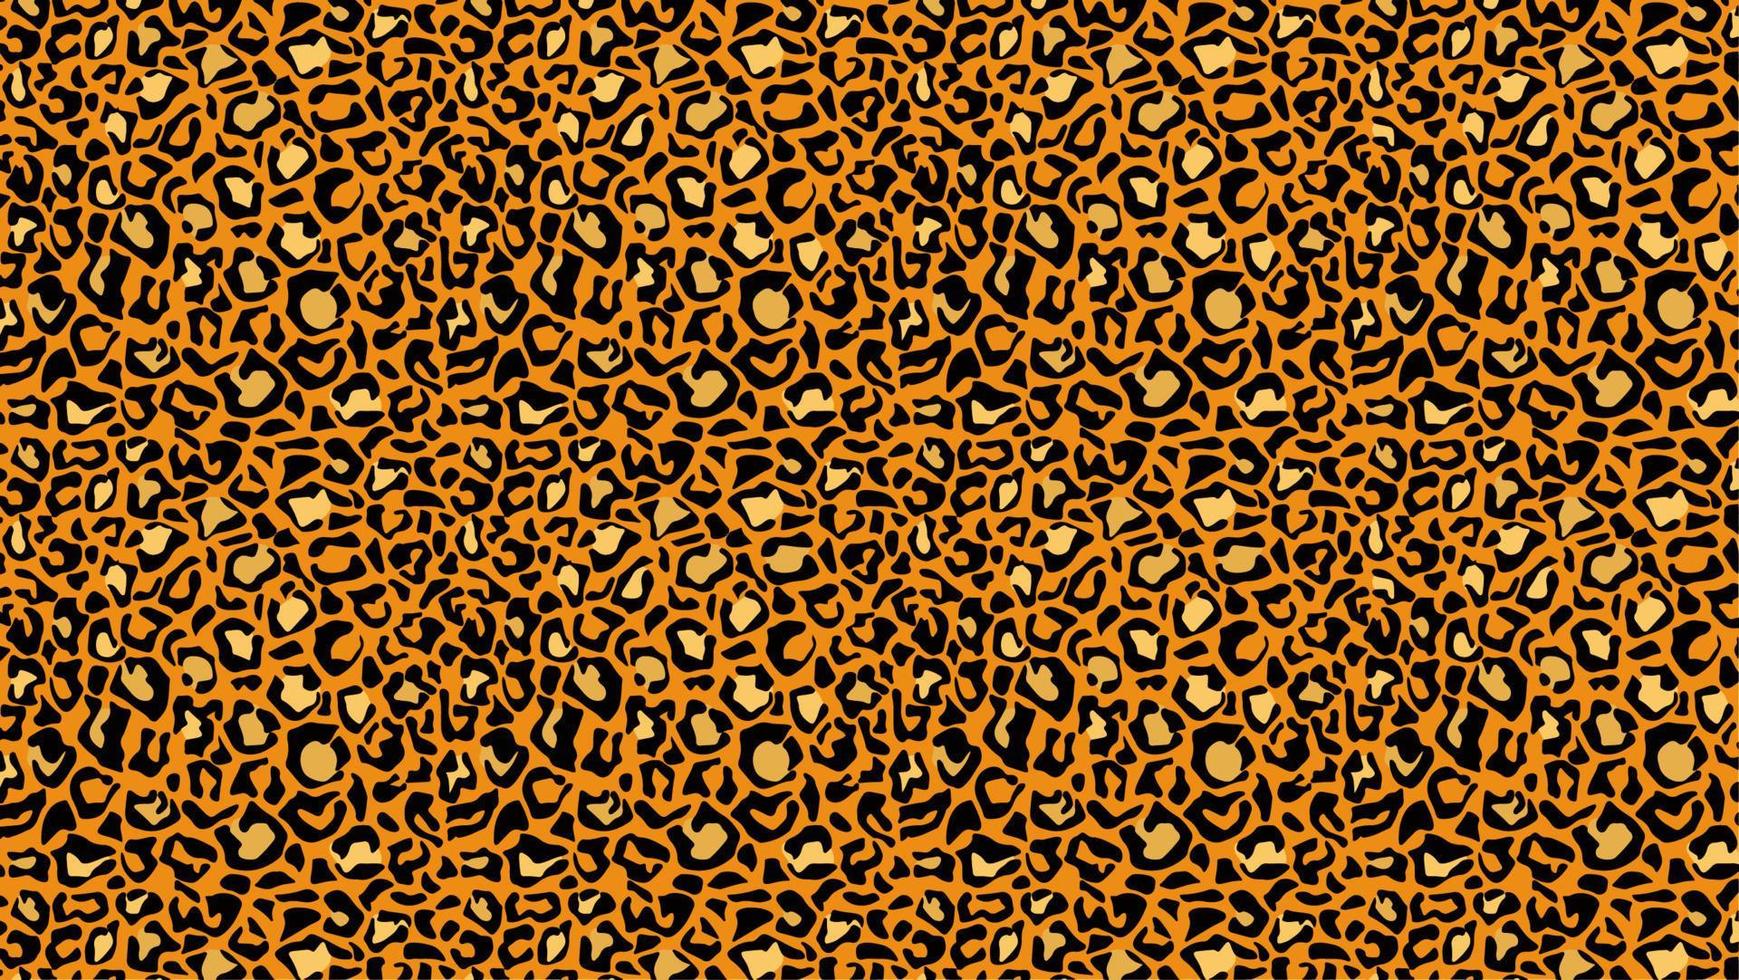 Leopard leather tracery background. Yellow panther spots with black jaguar outlines in orange cheetah vector color scheme.